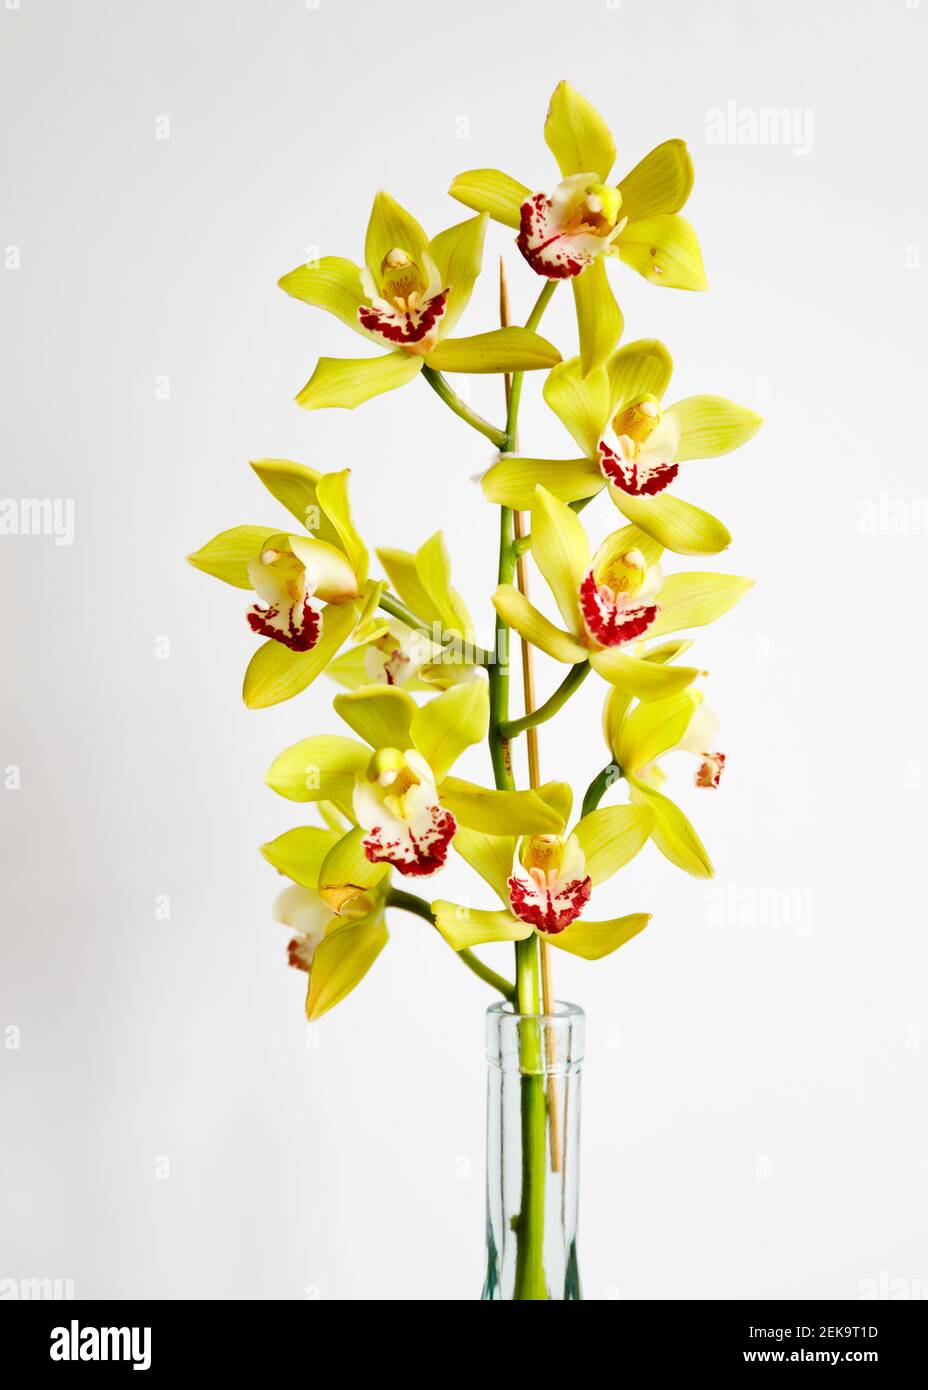 Yellow Orchid flowers, Cymbidium Ensifolium, in glass vase, against clean white background. Cut out. Stock Photo